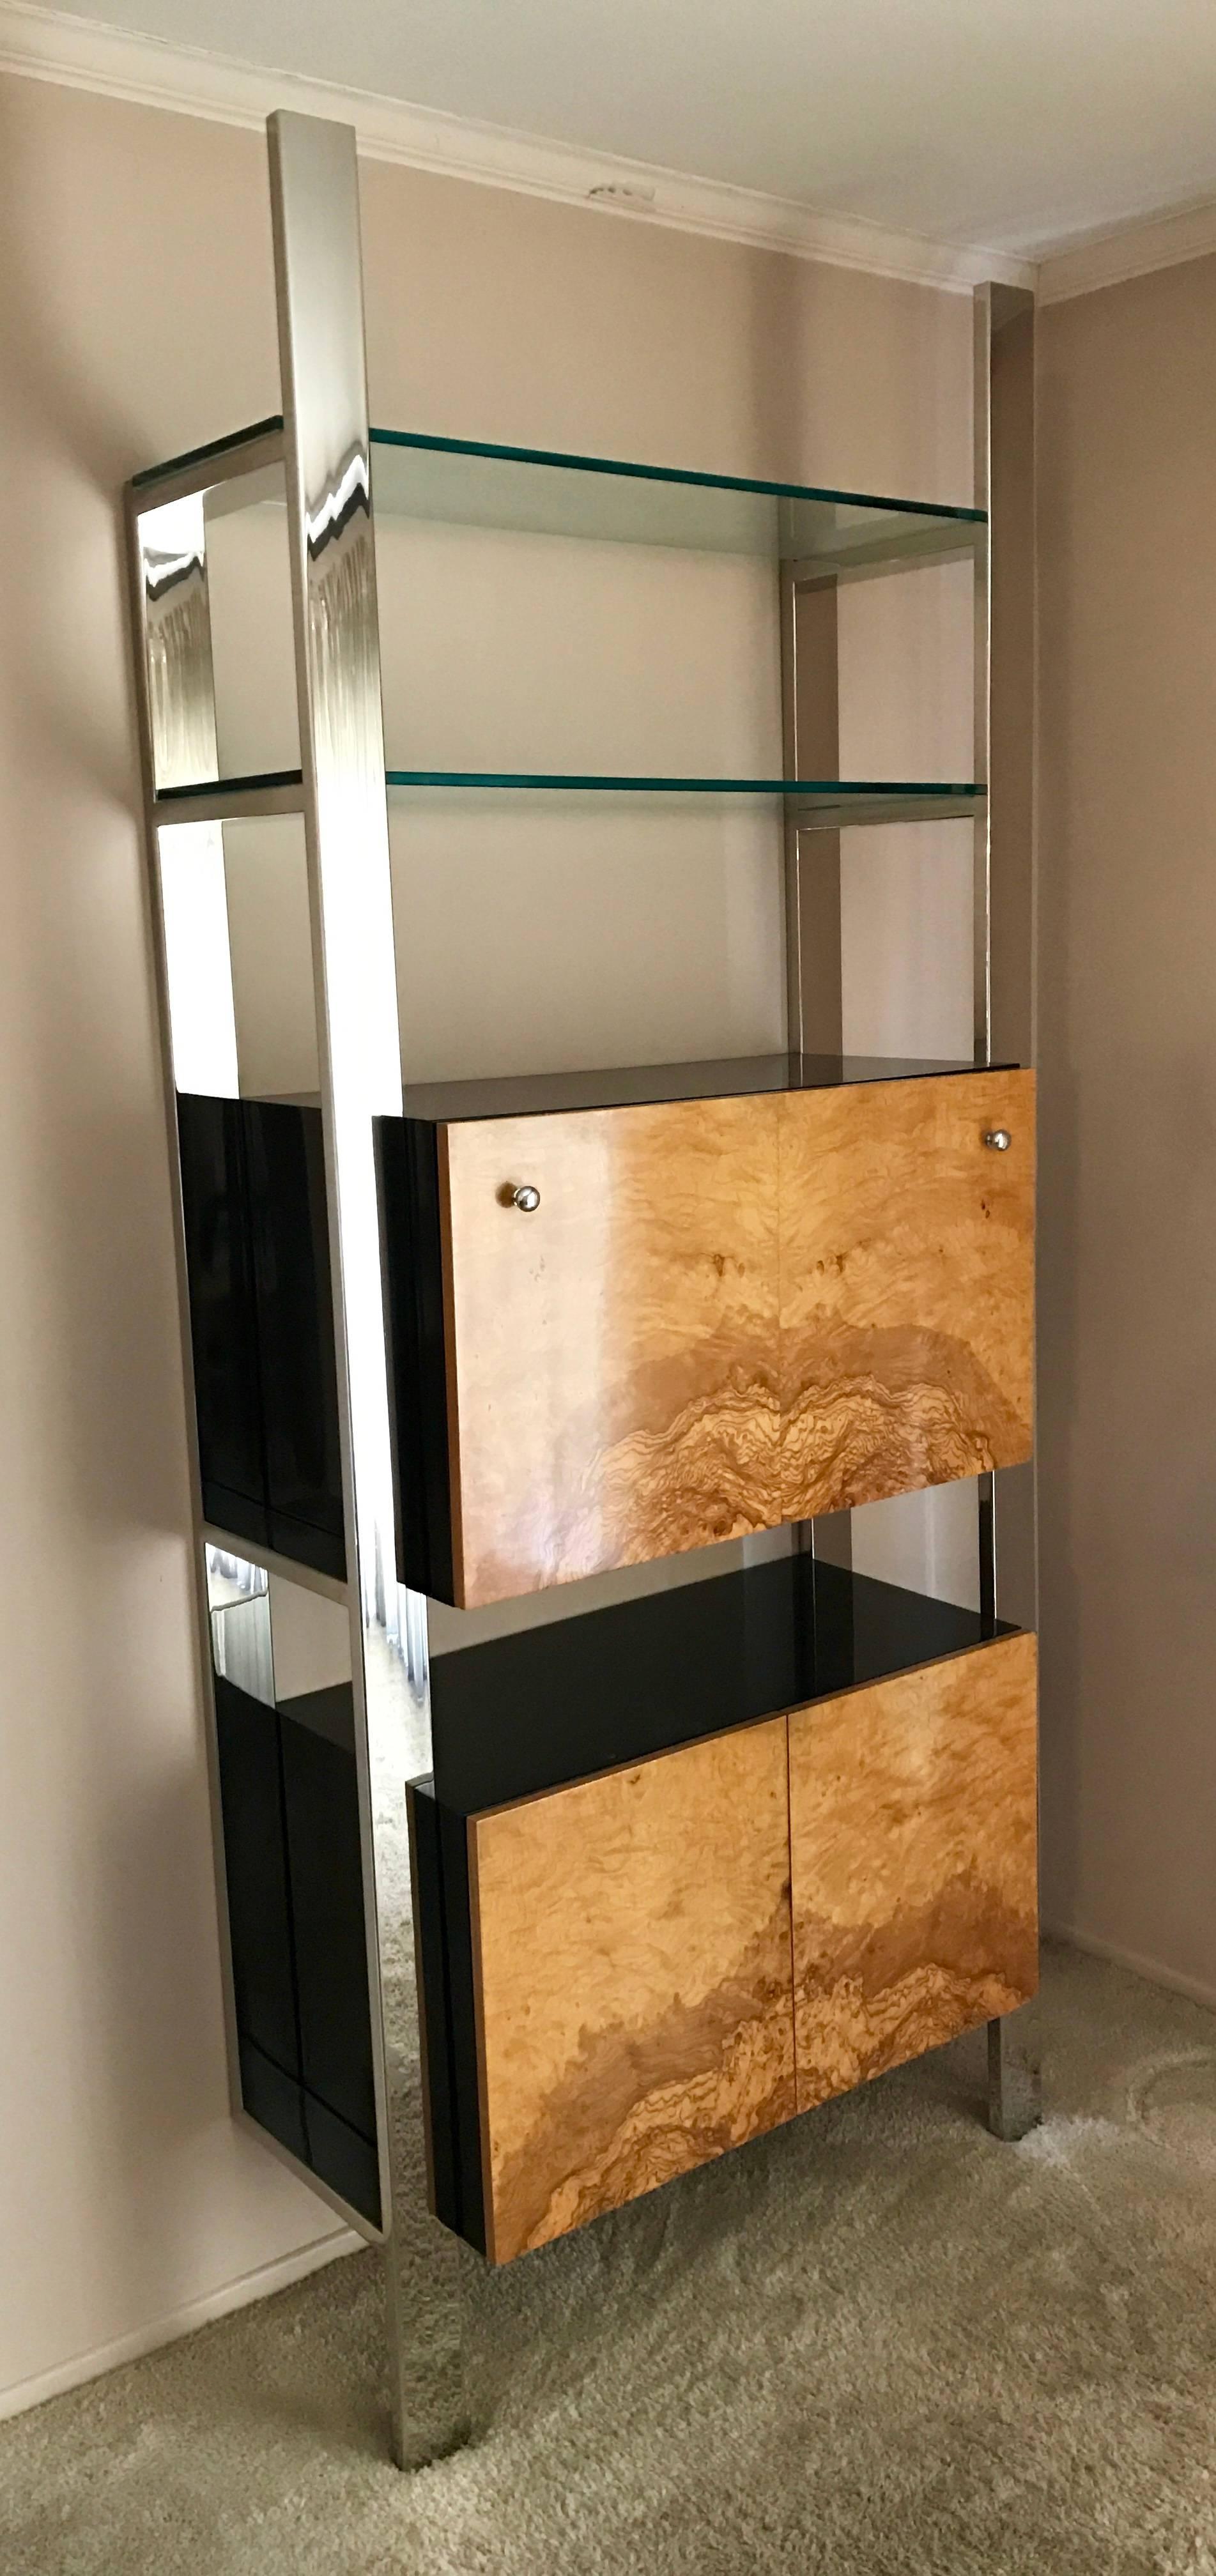 Mid-Century Modern. Designed by Milo Baughman for Pace Collection. Mirror polished stainless steel frame, burl wood bar cabinet and shelf storage cabinet, two glass shelves. Perfect for entertaining. Simply stunning and perfectly sized for any room.